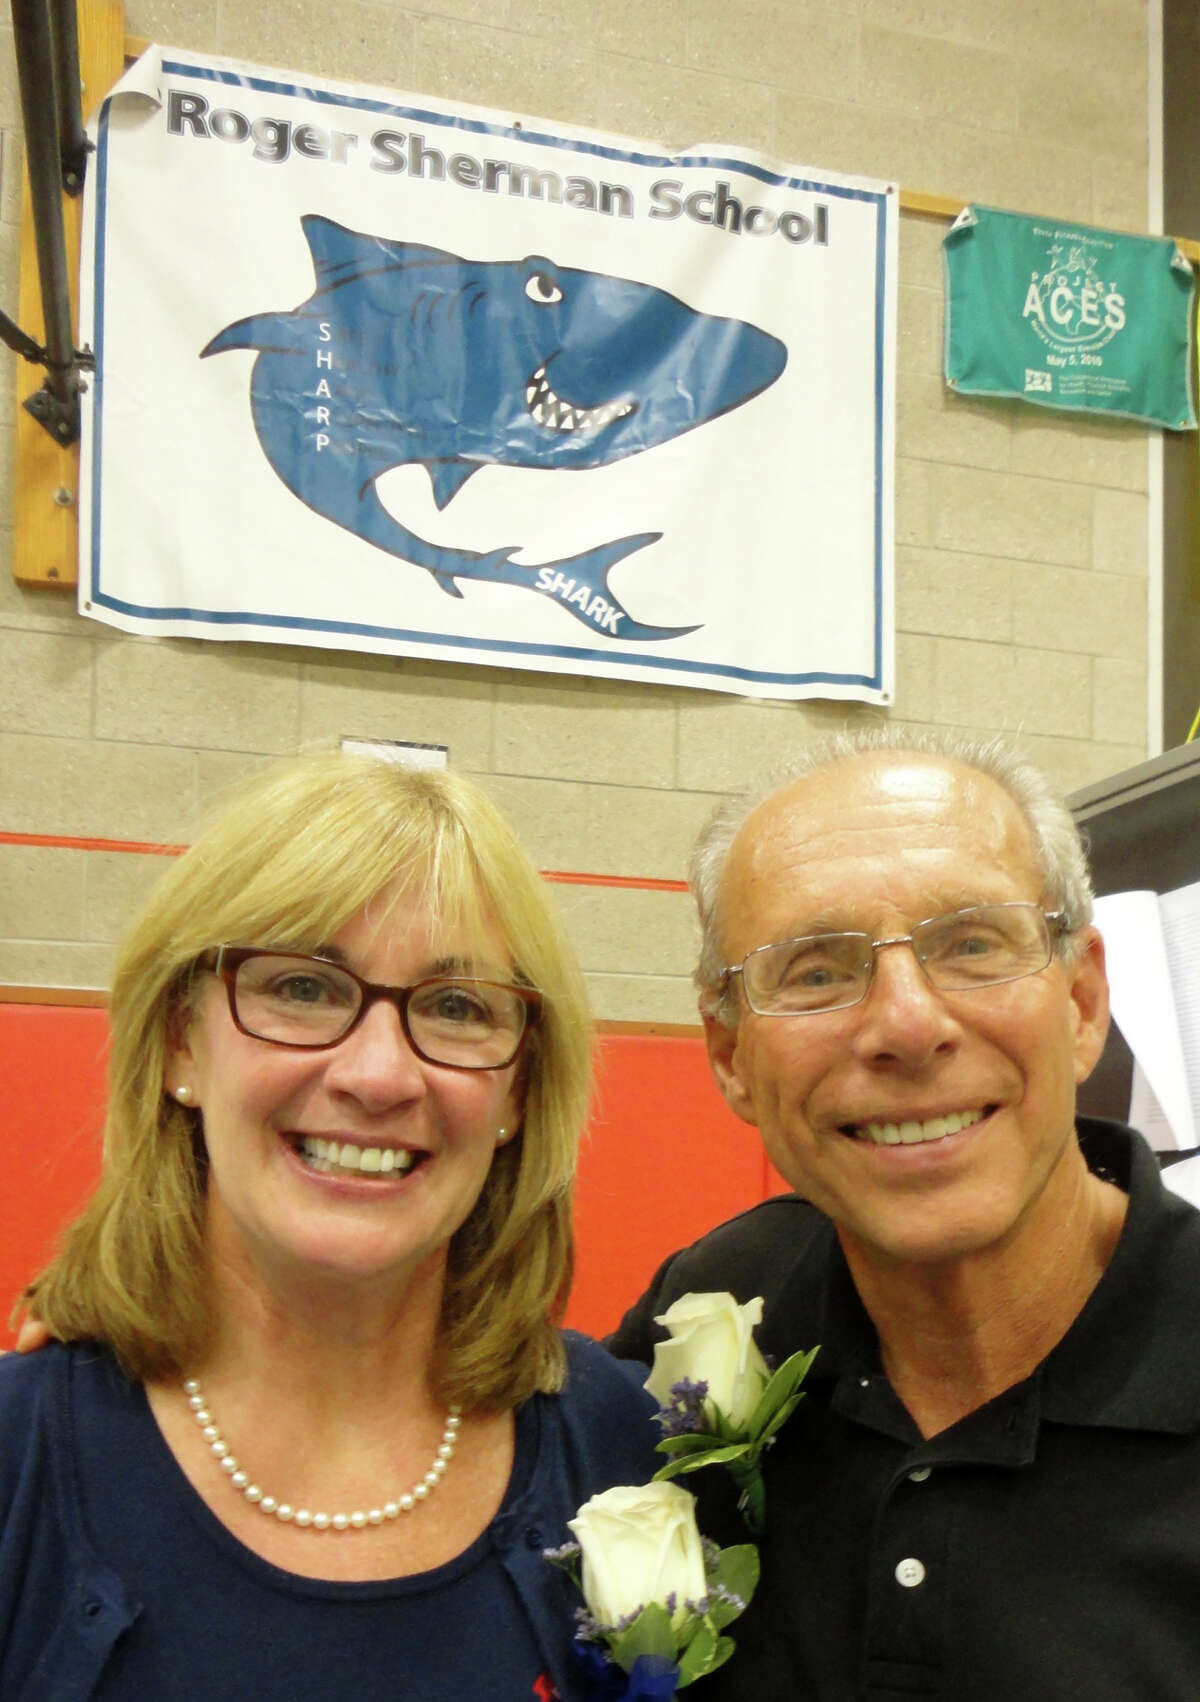 Sherman School Principal Eileen Roxbee poses with former Principal Mike Giarratano, who was the school's top administrator from 1995 to 2006. FAIRFIELD CITIZEN, CT 10/11/13